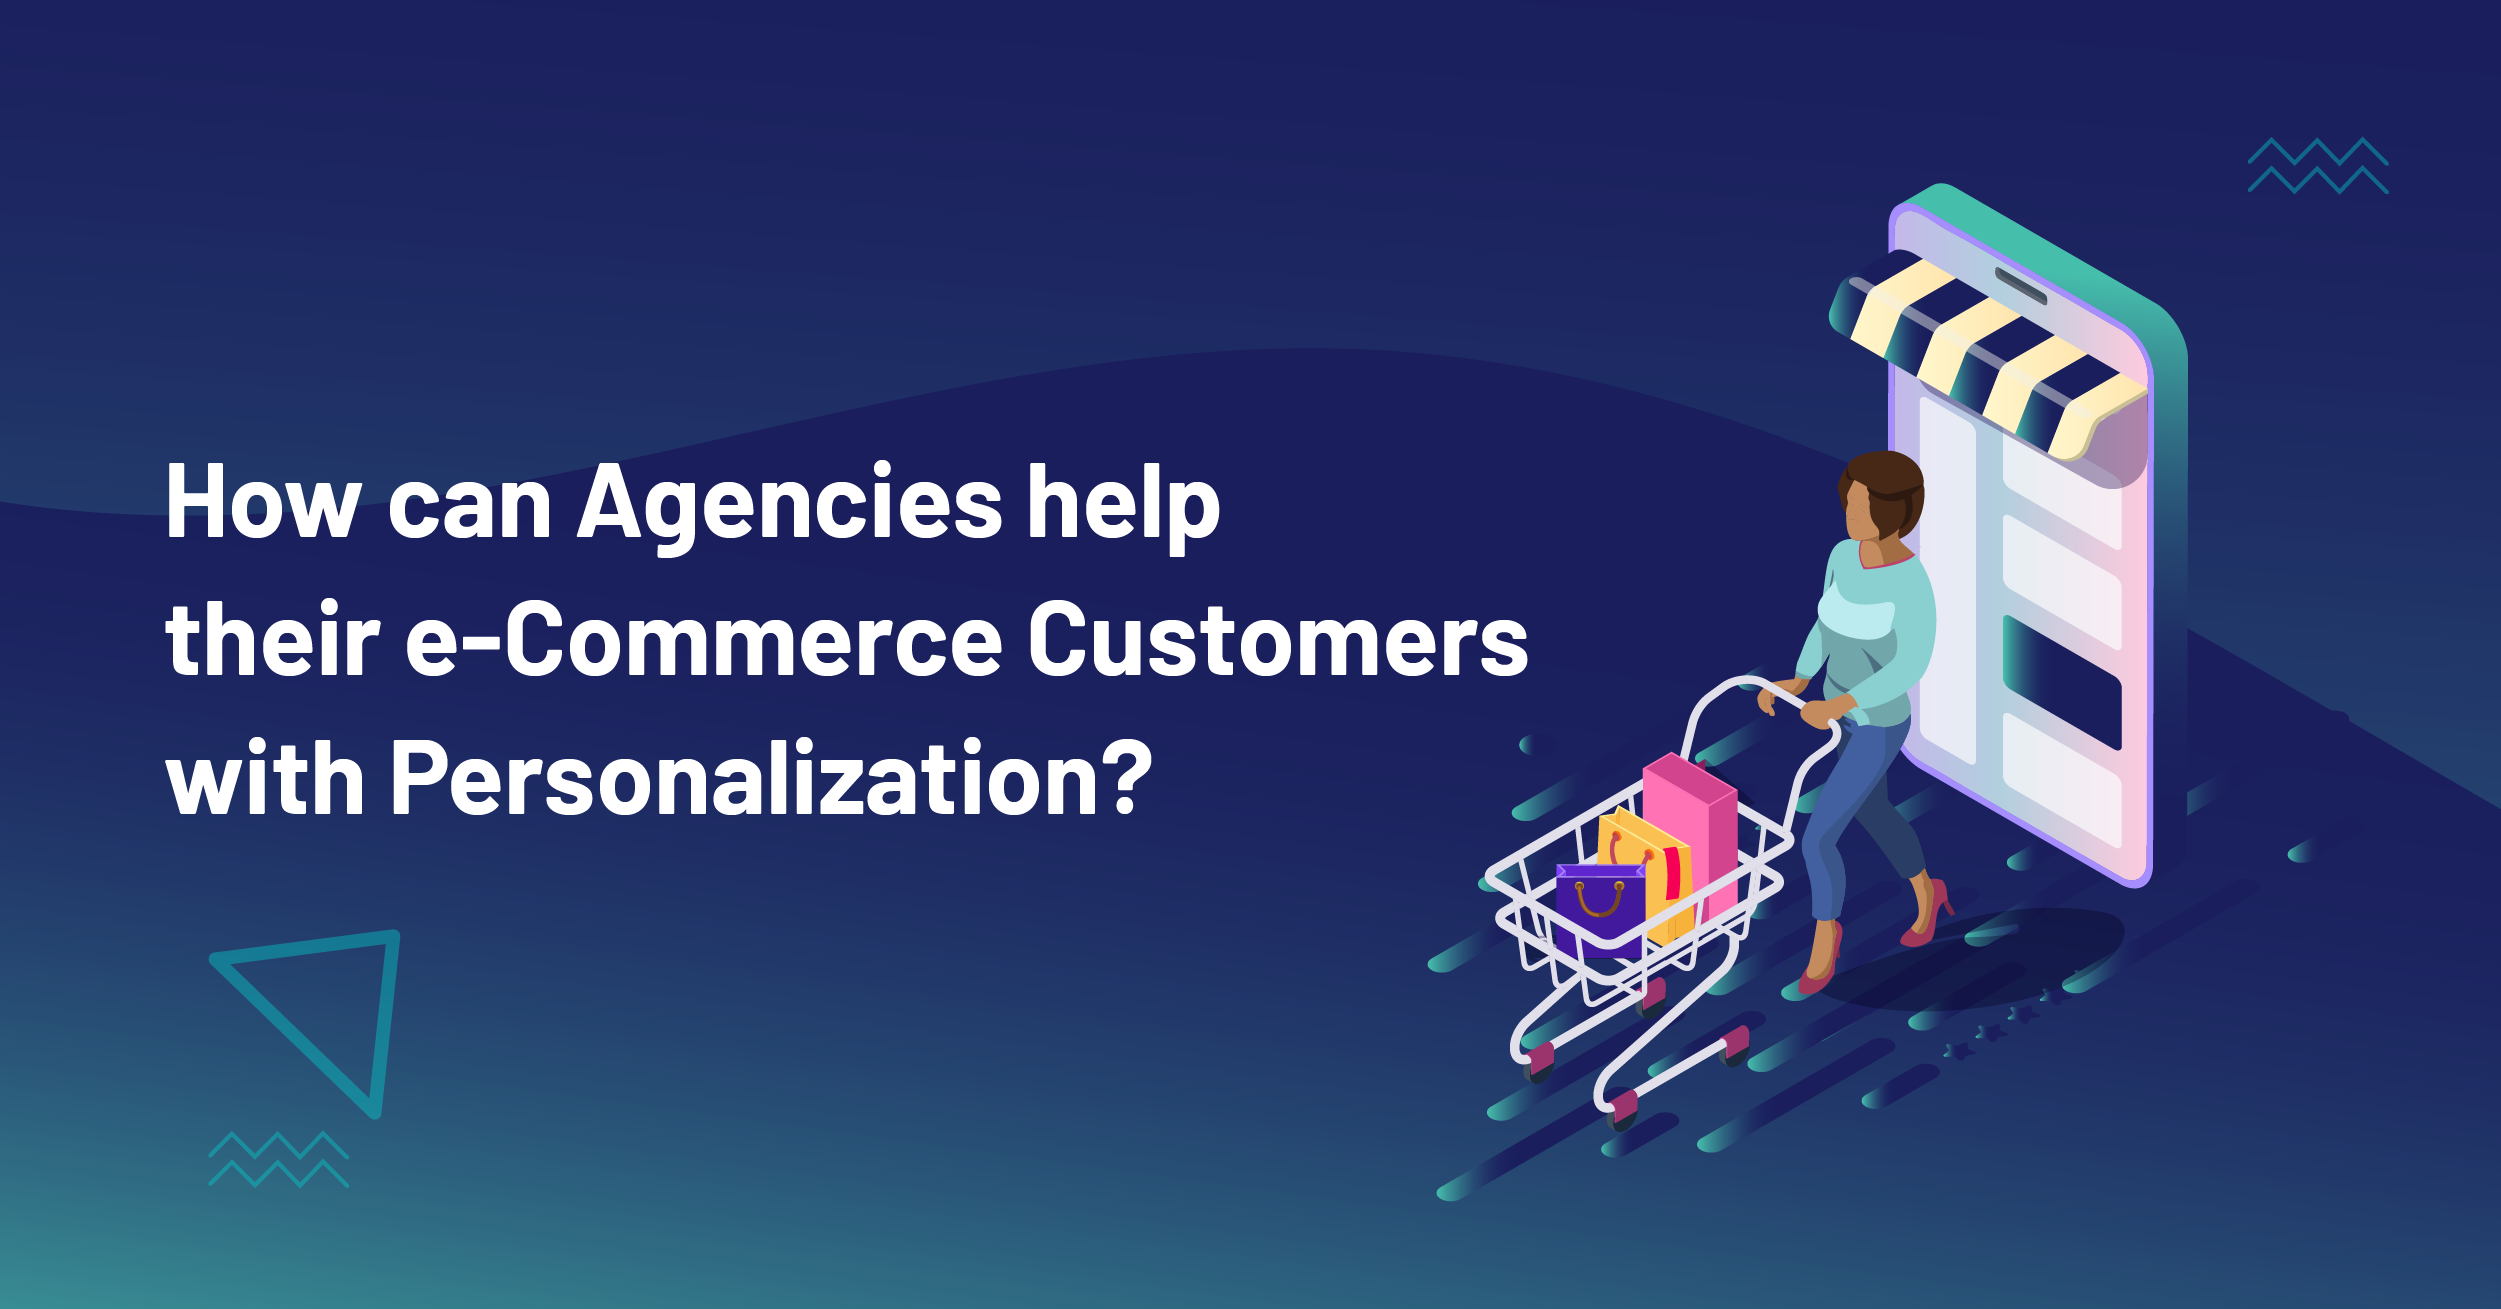 How can Agencies help their e-Commerce Customers with Personalization?